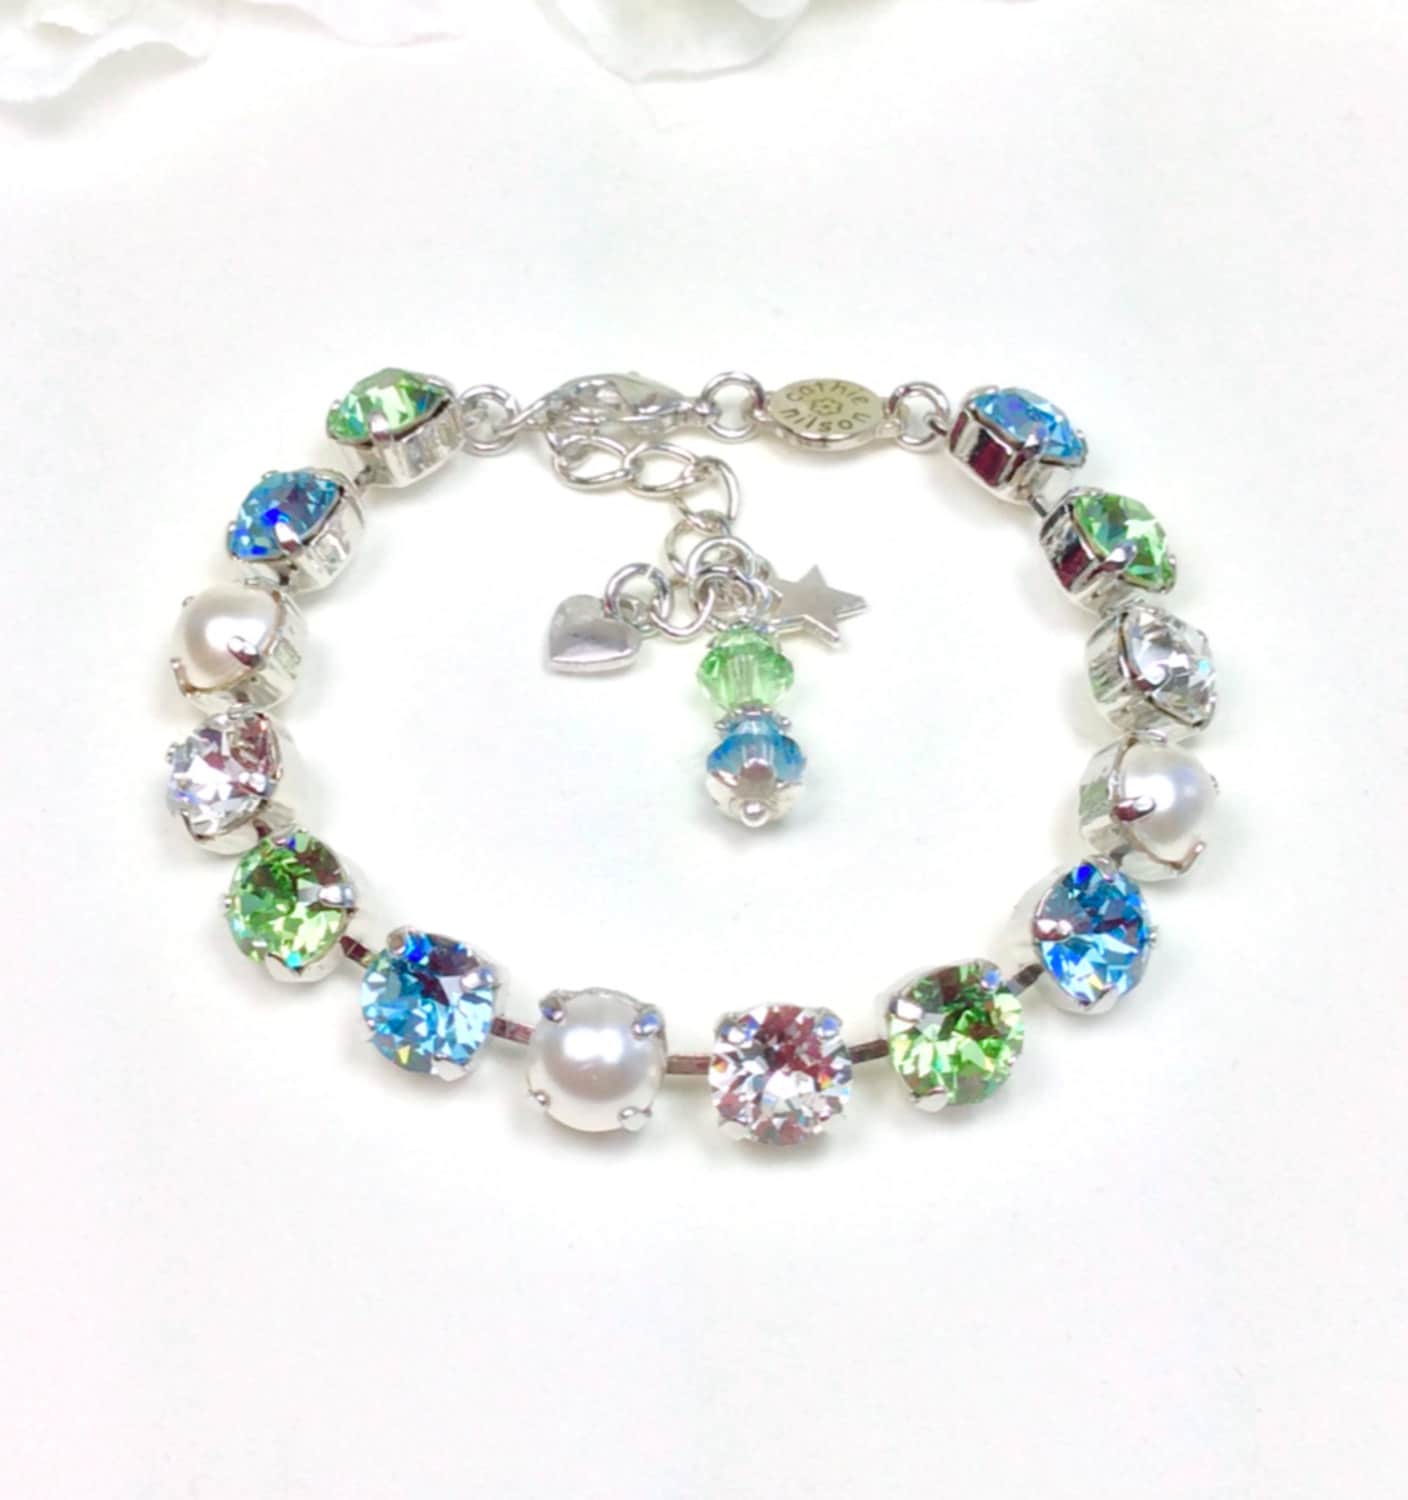 Swarovski Crystal 8.5mm Mother's Bracelet With Pearls  - Beautiful Mother's Day Gift!  Your Kids or GrandKids Birthstones - FREE SHIPPING